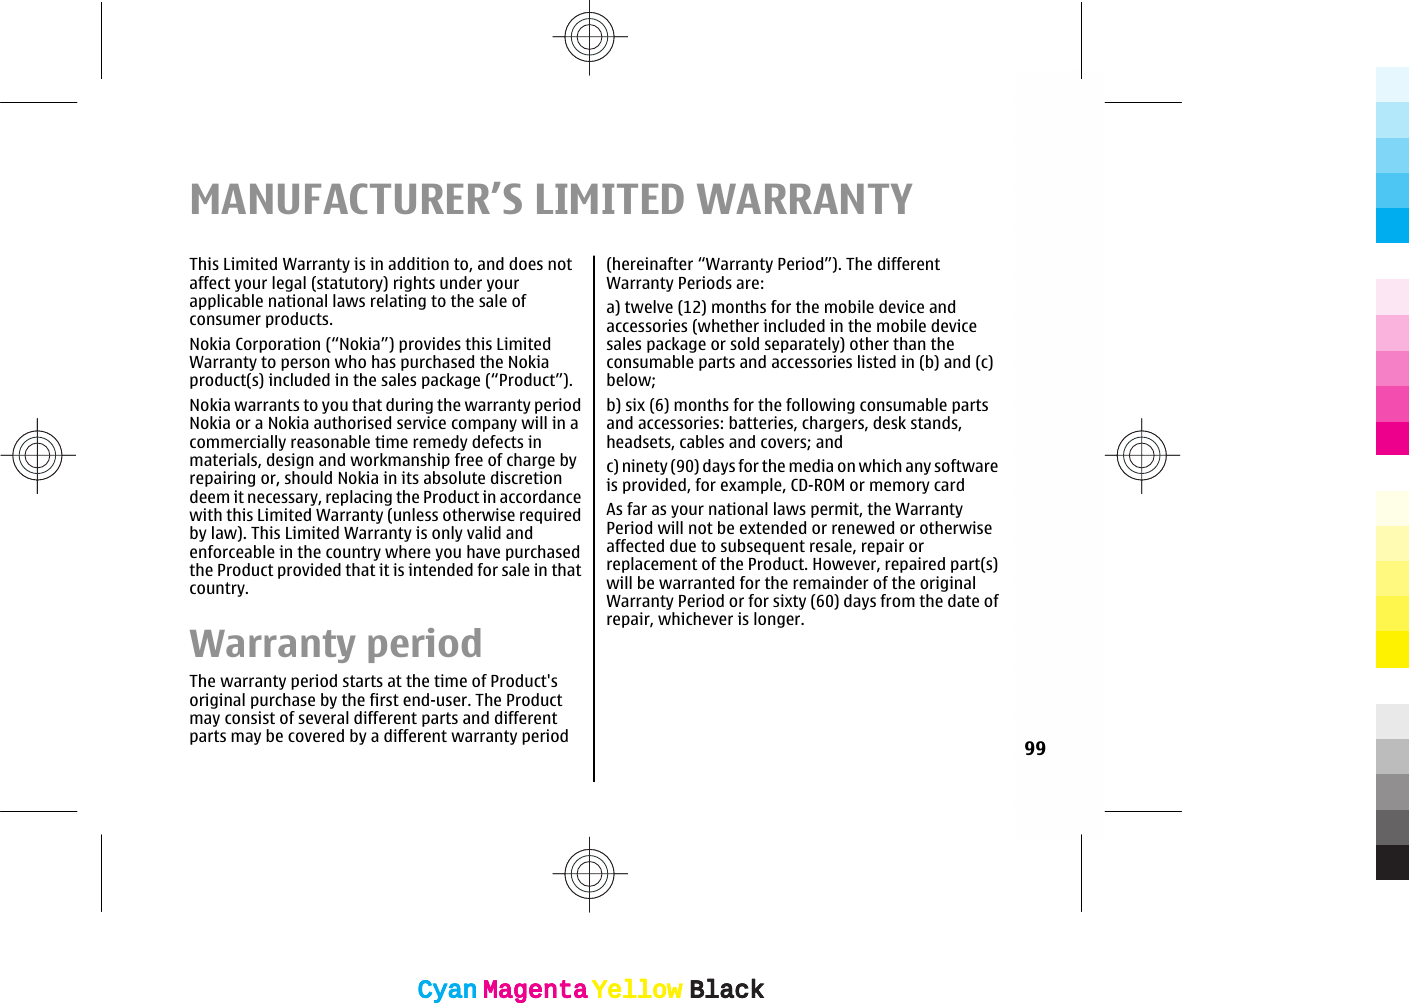 MANUFACTURER’S LIMITED WARRANTYThis Limited Warranty is in addition to, and does notaffect your legal (statutory) rights under yourapplicable national laws relating to the sale ofconsumer products.Nokia Corporation (“Nokia”) provides this LimitedWarranty to person who has purchased the Nokiaproduct(s) included in the sales package (“Product”).Nokia warrants to you that during the warranty periodNokia or a Nokia authorised service company will in acommercially reasonable time remedy defects inmaterials, design and workmanship free of charge byrepairing or, should Nokia in its absolute discretiondeem it necessary, replacing the Product in accordancewith this Limited Warranty (unless otherwise requiredby law). This Limited Warranty is only valid andenforceable in the country where you have purchasedthe Product provided that it is intended for sale in thatcountry.Warranty periodThe warranty period starts at the time of Product&apos;soriginal purchase by the first end-user. The Productmay consist of several different parts and differentparts may be covered by a different warranty period(hereinafter “Warranty Period”). The differentWarranty Periods are:a) twelve (12) months for the mobile device andaccessories (whether included in the mobile devicesales package or sold separately) other than theconsumable parts and accessories listed in (b) and (c)below;b) six (6) months for the following consumable partsand accessories: batteries, chargers, desk stands,headsets, cables and covers; andc) ninety (90) days for the media on which any softwareis provided, for example, CD-ROM or memory cardAs far as your national laws permit, the WarrantyPeriod will not be extended or renewed or otherwiseaffected due to subsequent resale, repair orreplacement of the Product. However, repaired part(s)will be warranted for the remainder of the originalWarranty Period or for sixty (60) days from the date ofrepair, whichever is longer.99CyanCyanMagentaMagentaYellowYellowBlackBlackCyanCyanMagentaMagentaYellowYellowBlackBlack